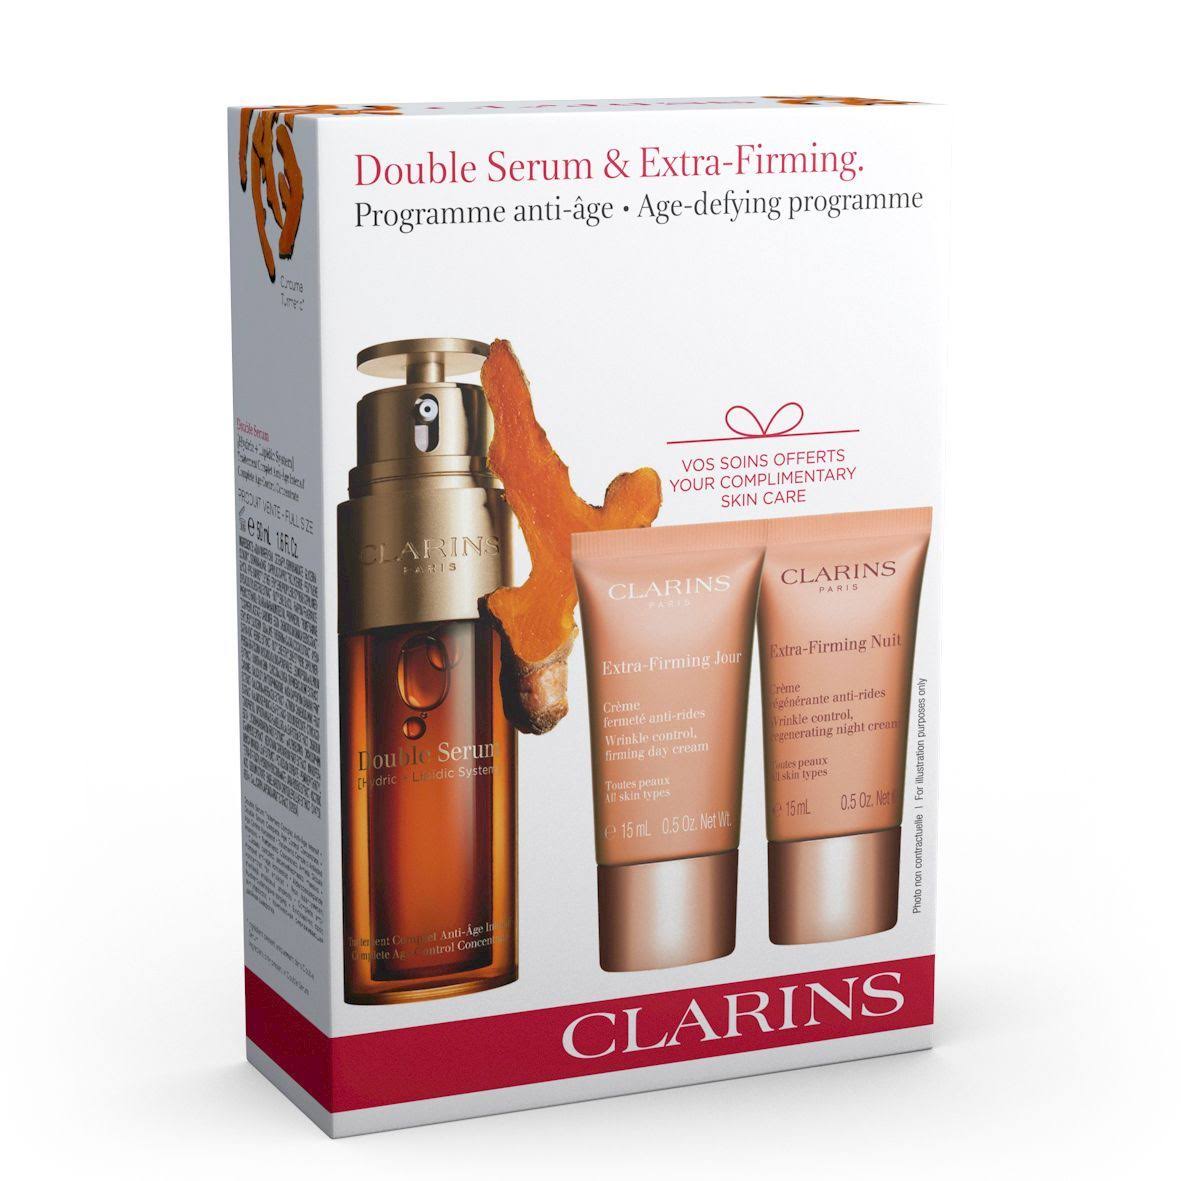 Clarins Double Serum & Extra Firming Value Pack